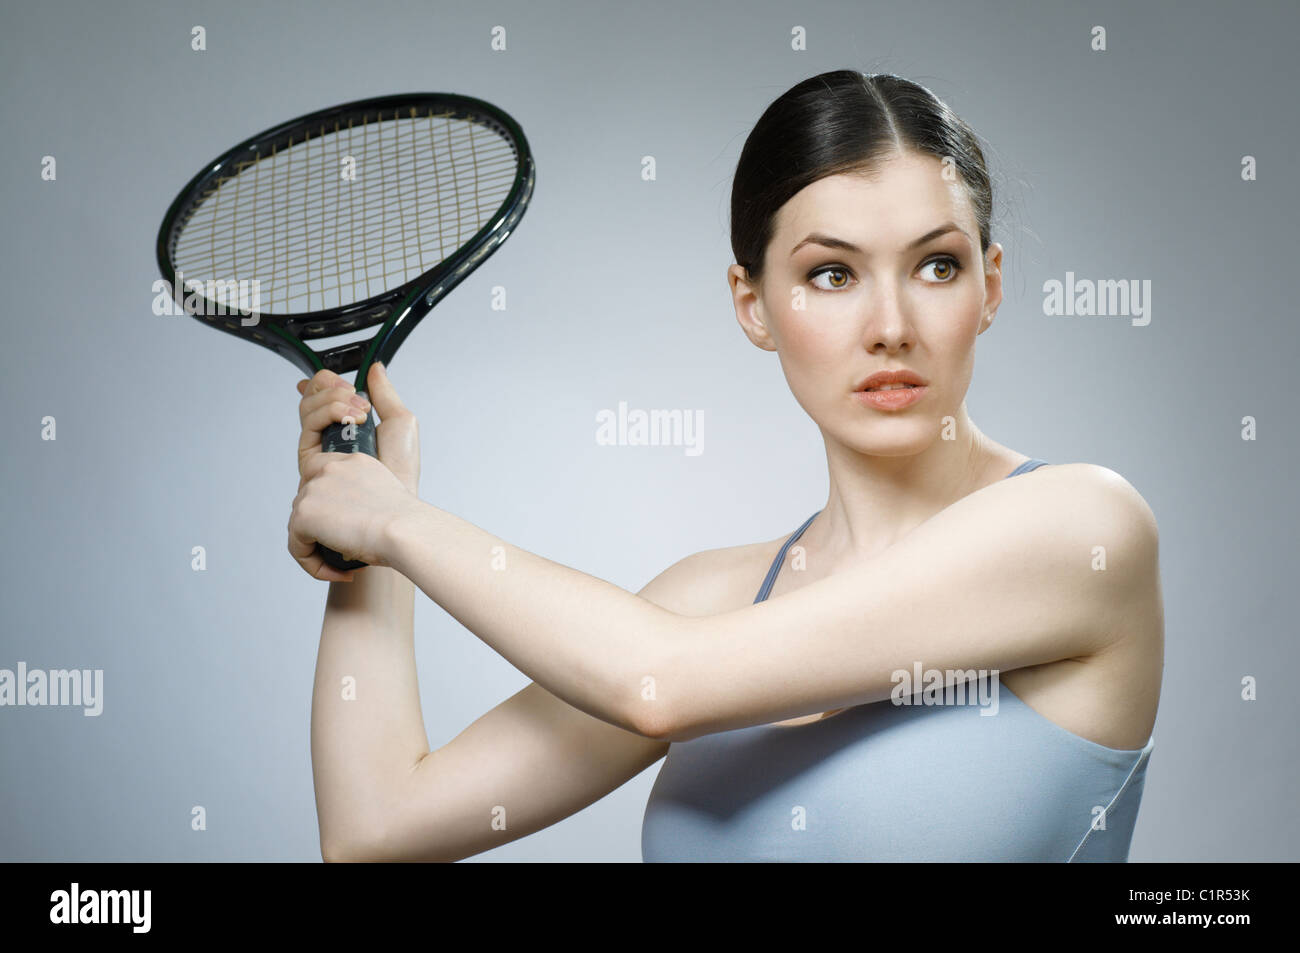 Beautiful sporty girl playing tennis very passionately Stock Photo